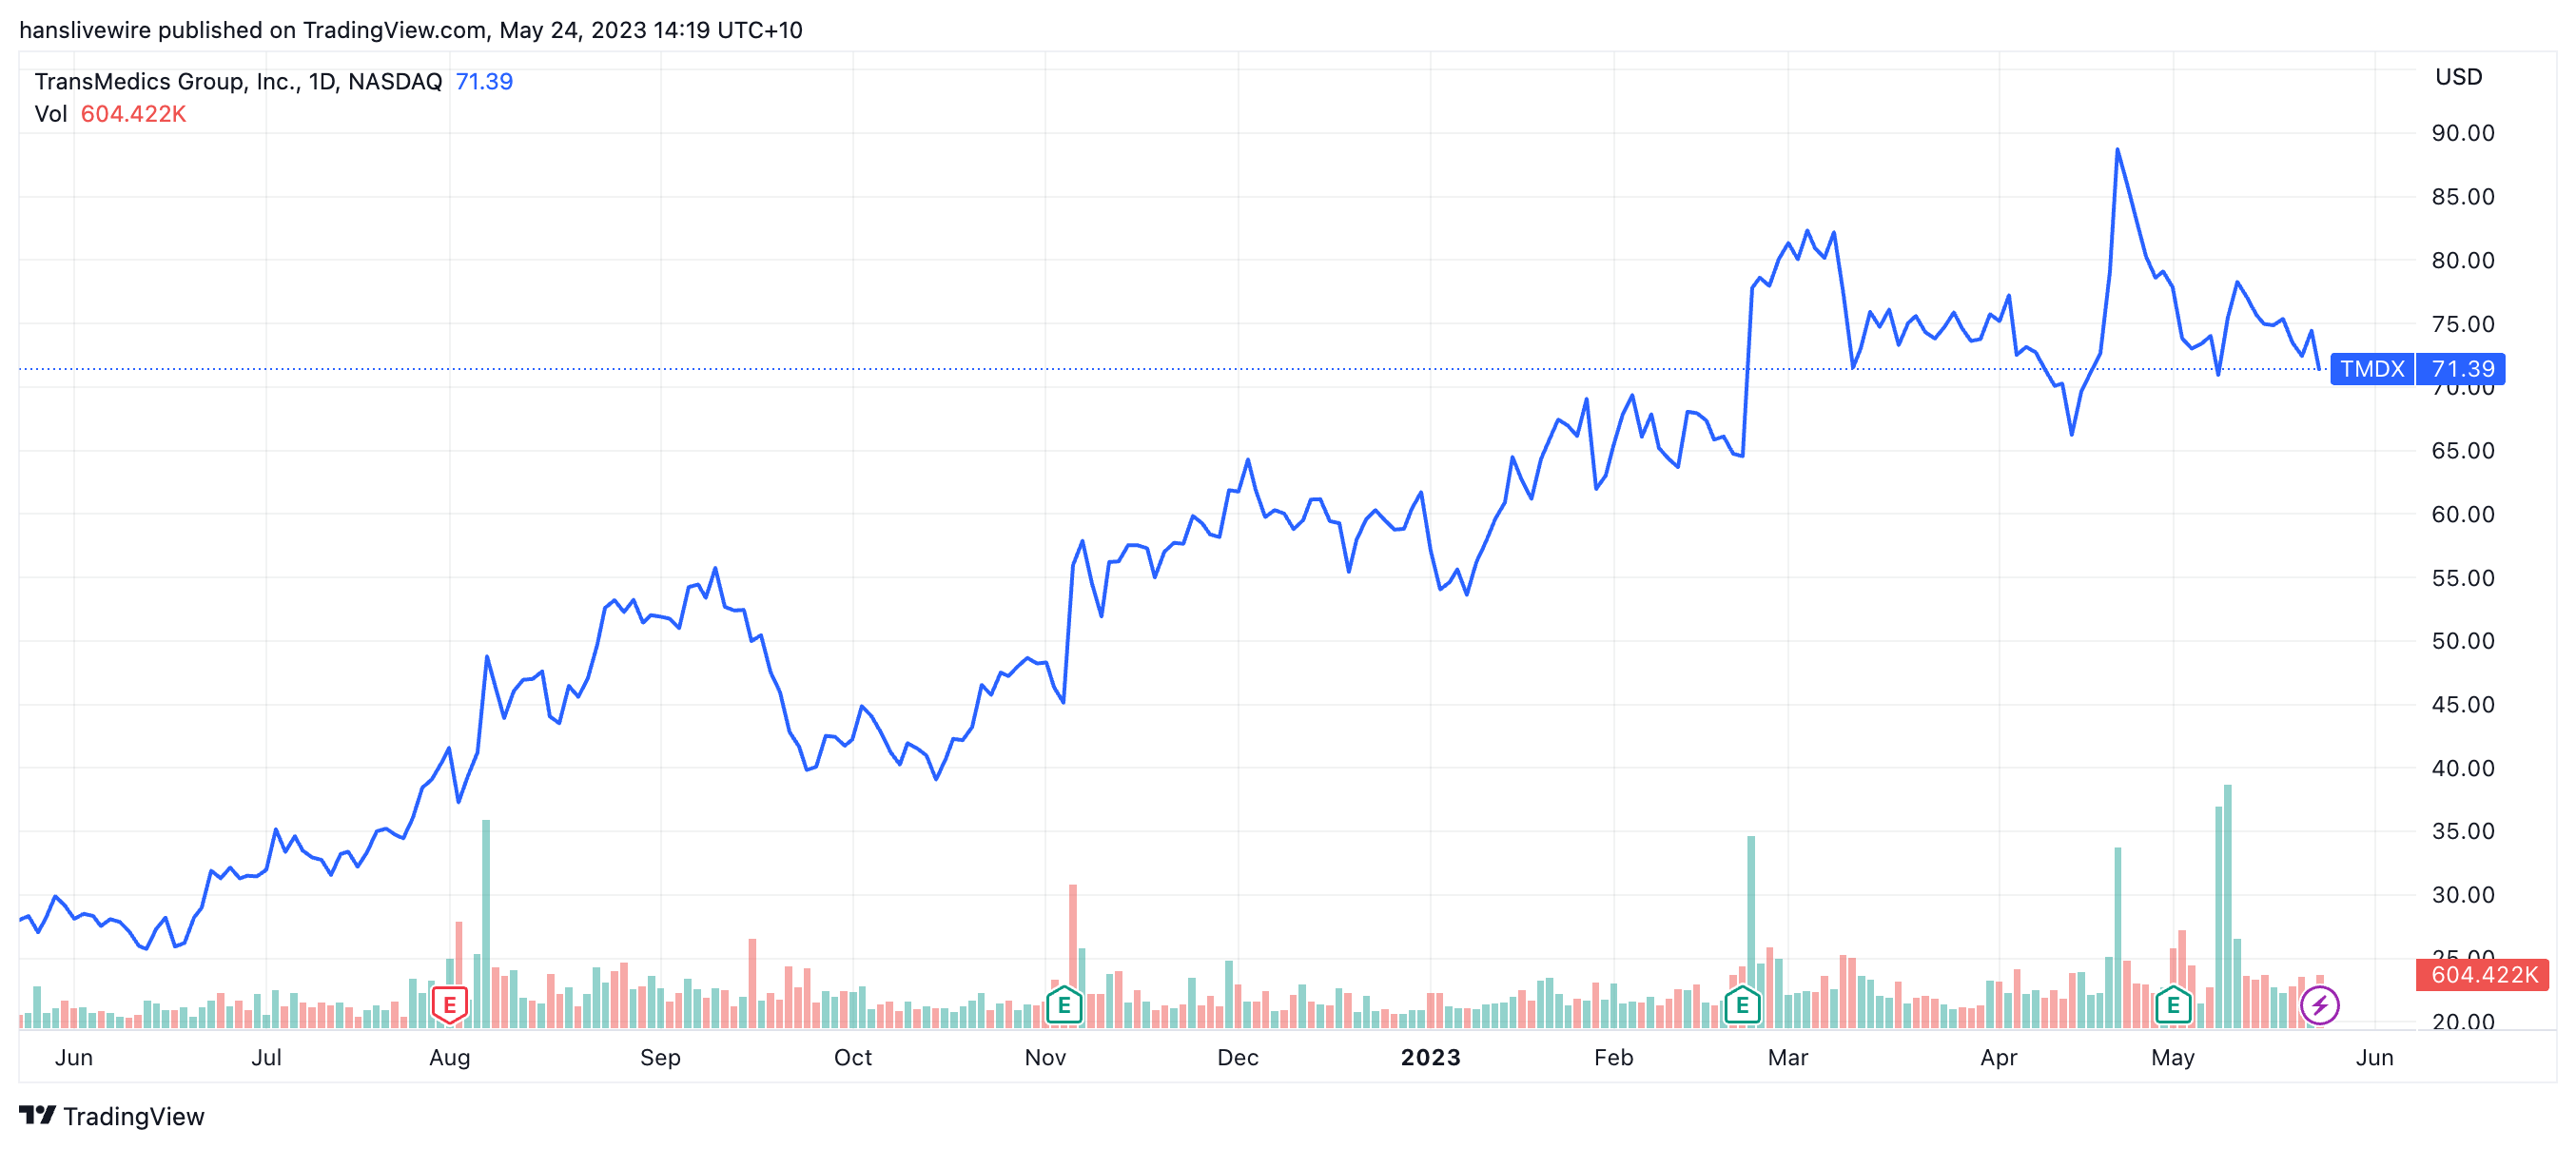 TransMedics (NAS: TMPX) over the last year. (Source: TradingView)